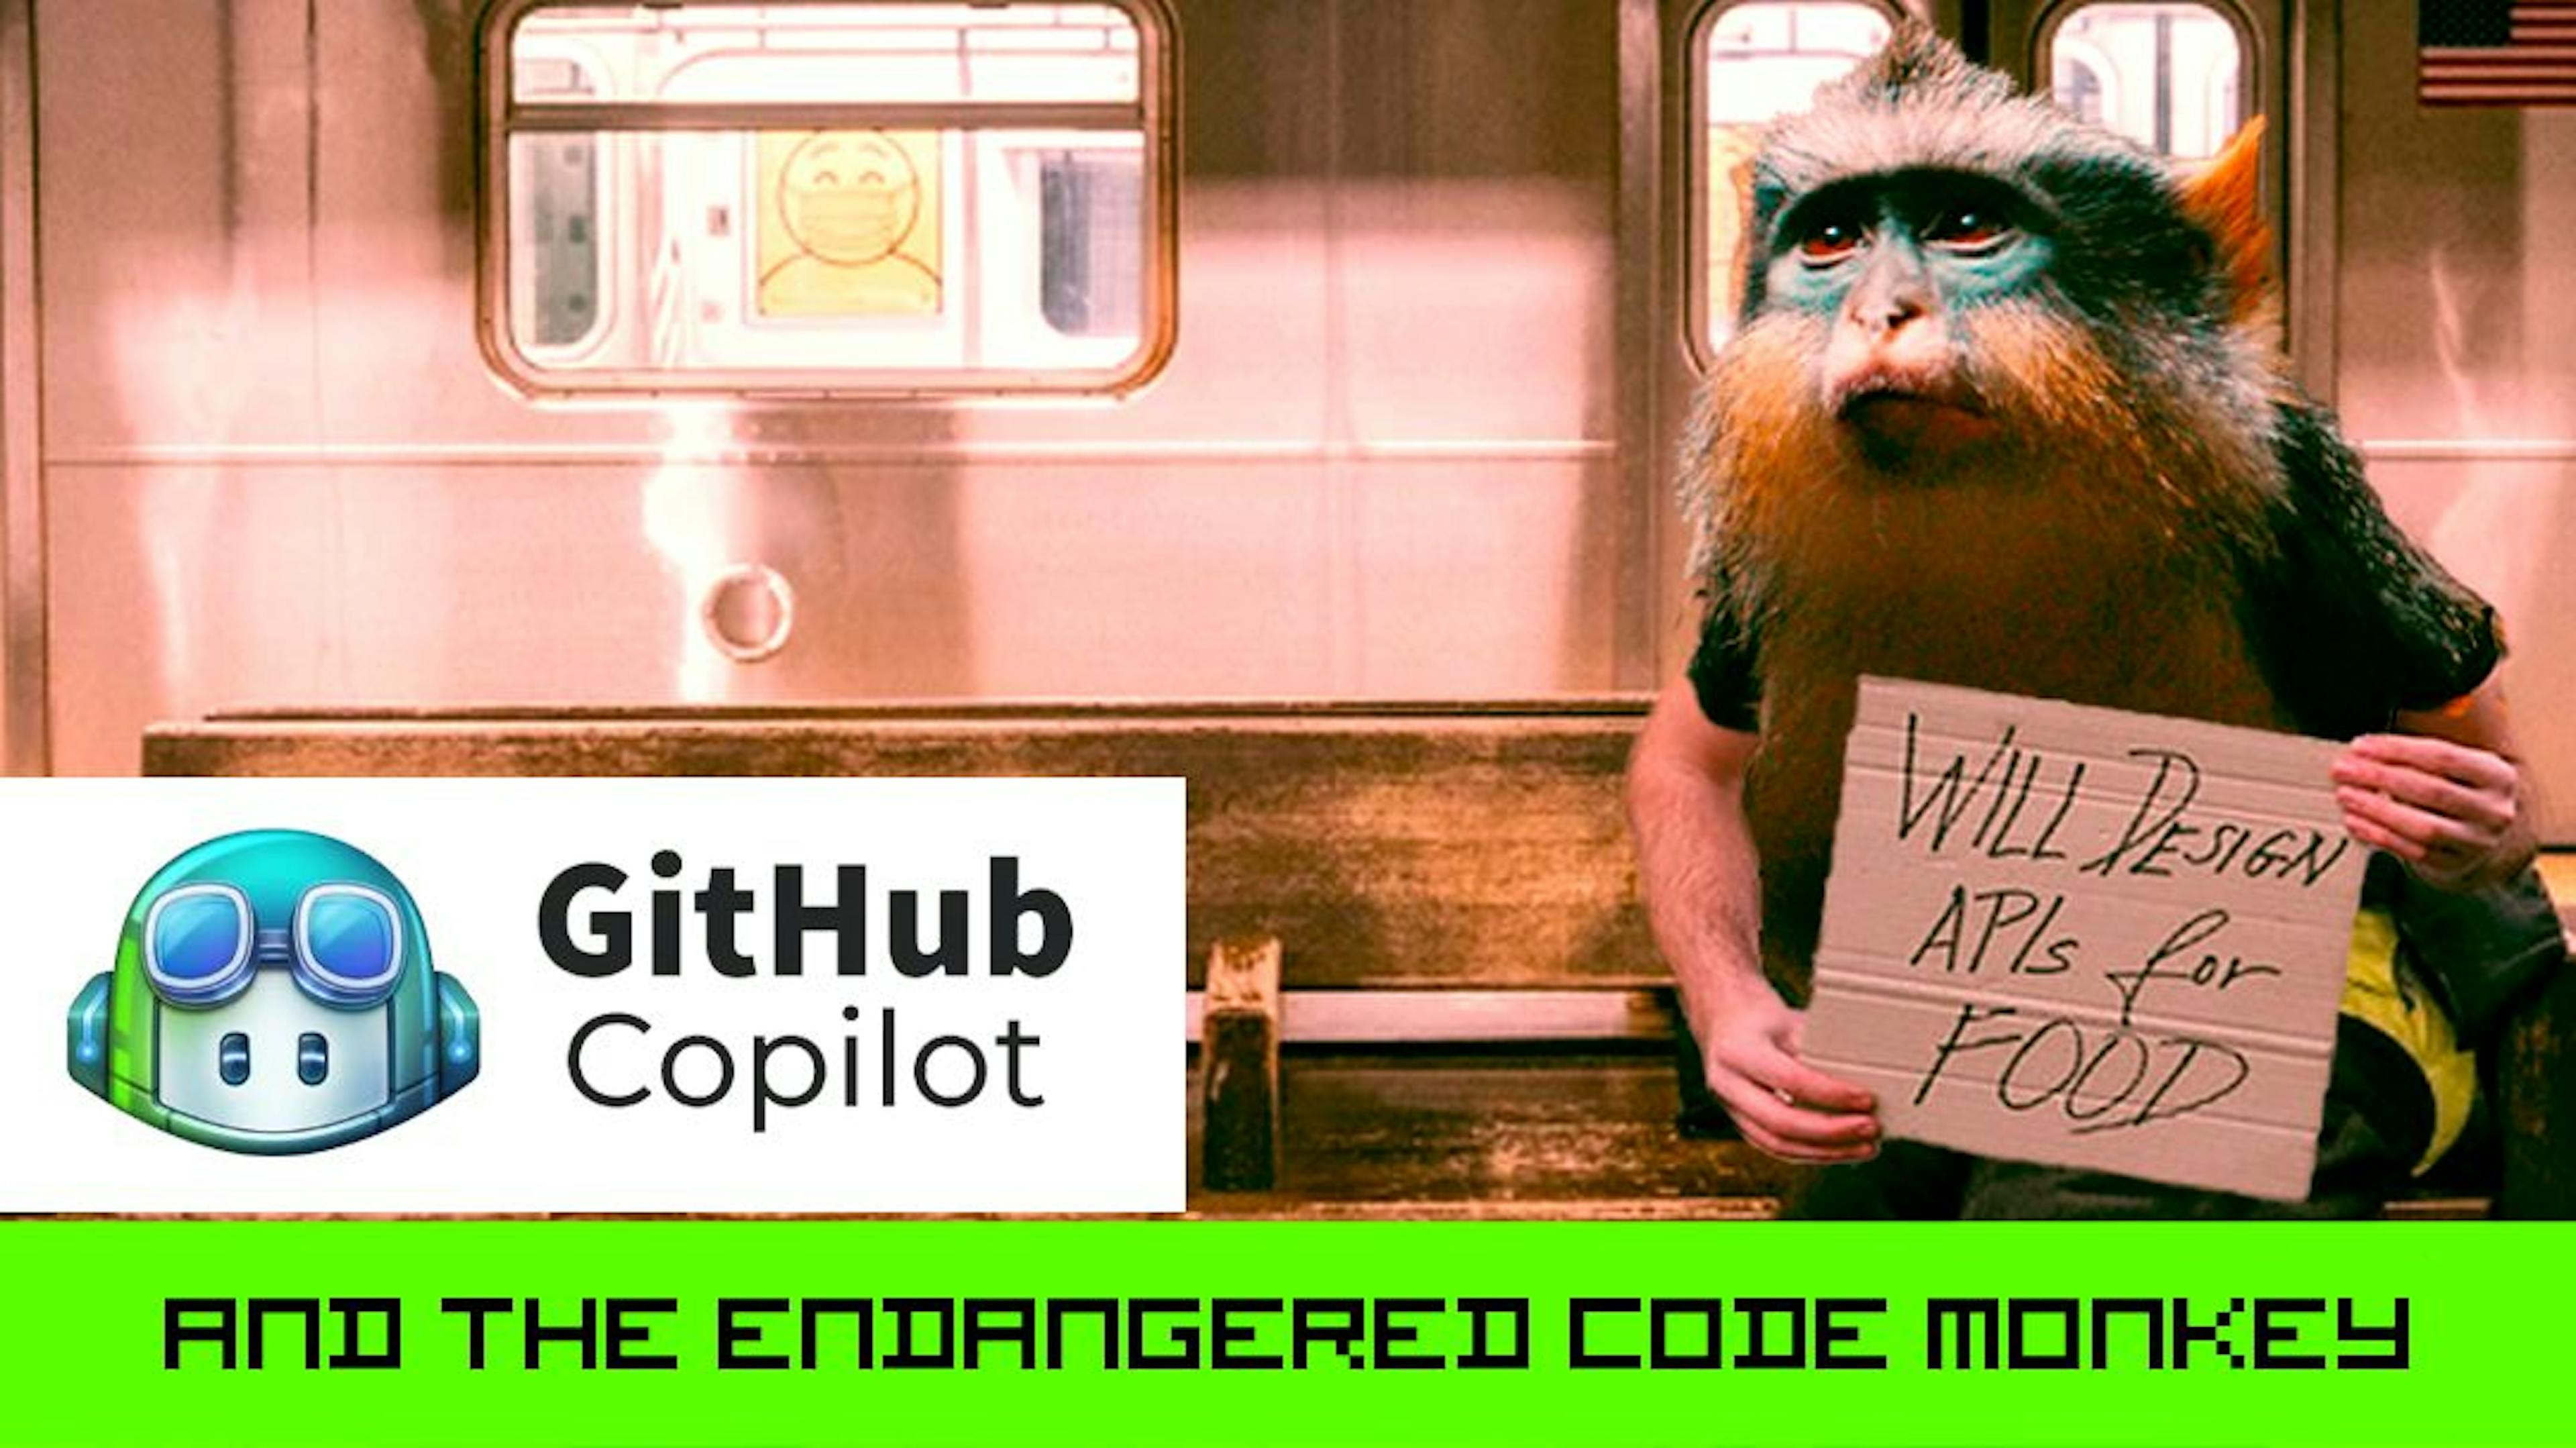 /github-copilot-and-the-endangered-code-monkey feature image